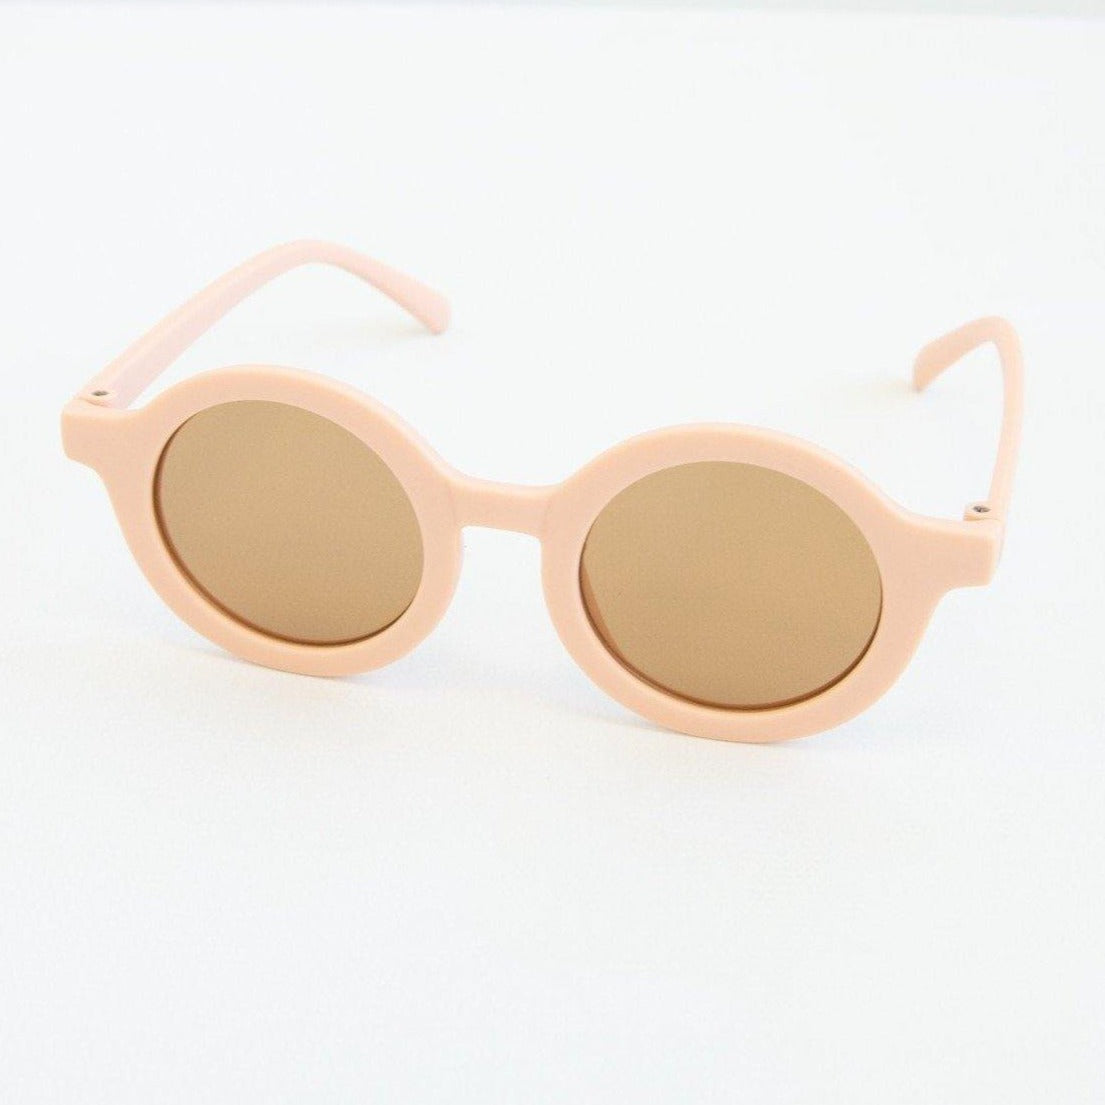 The Baby Cubby Kids' Round Retro Sunglasses - Blush Pink with Brown Lenses